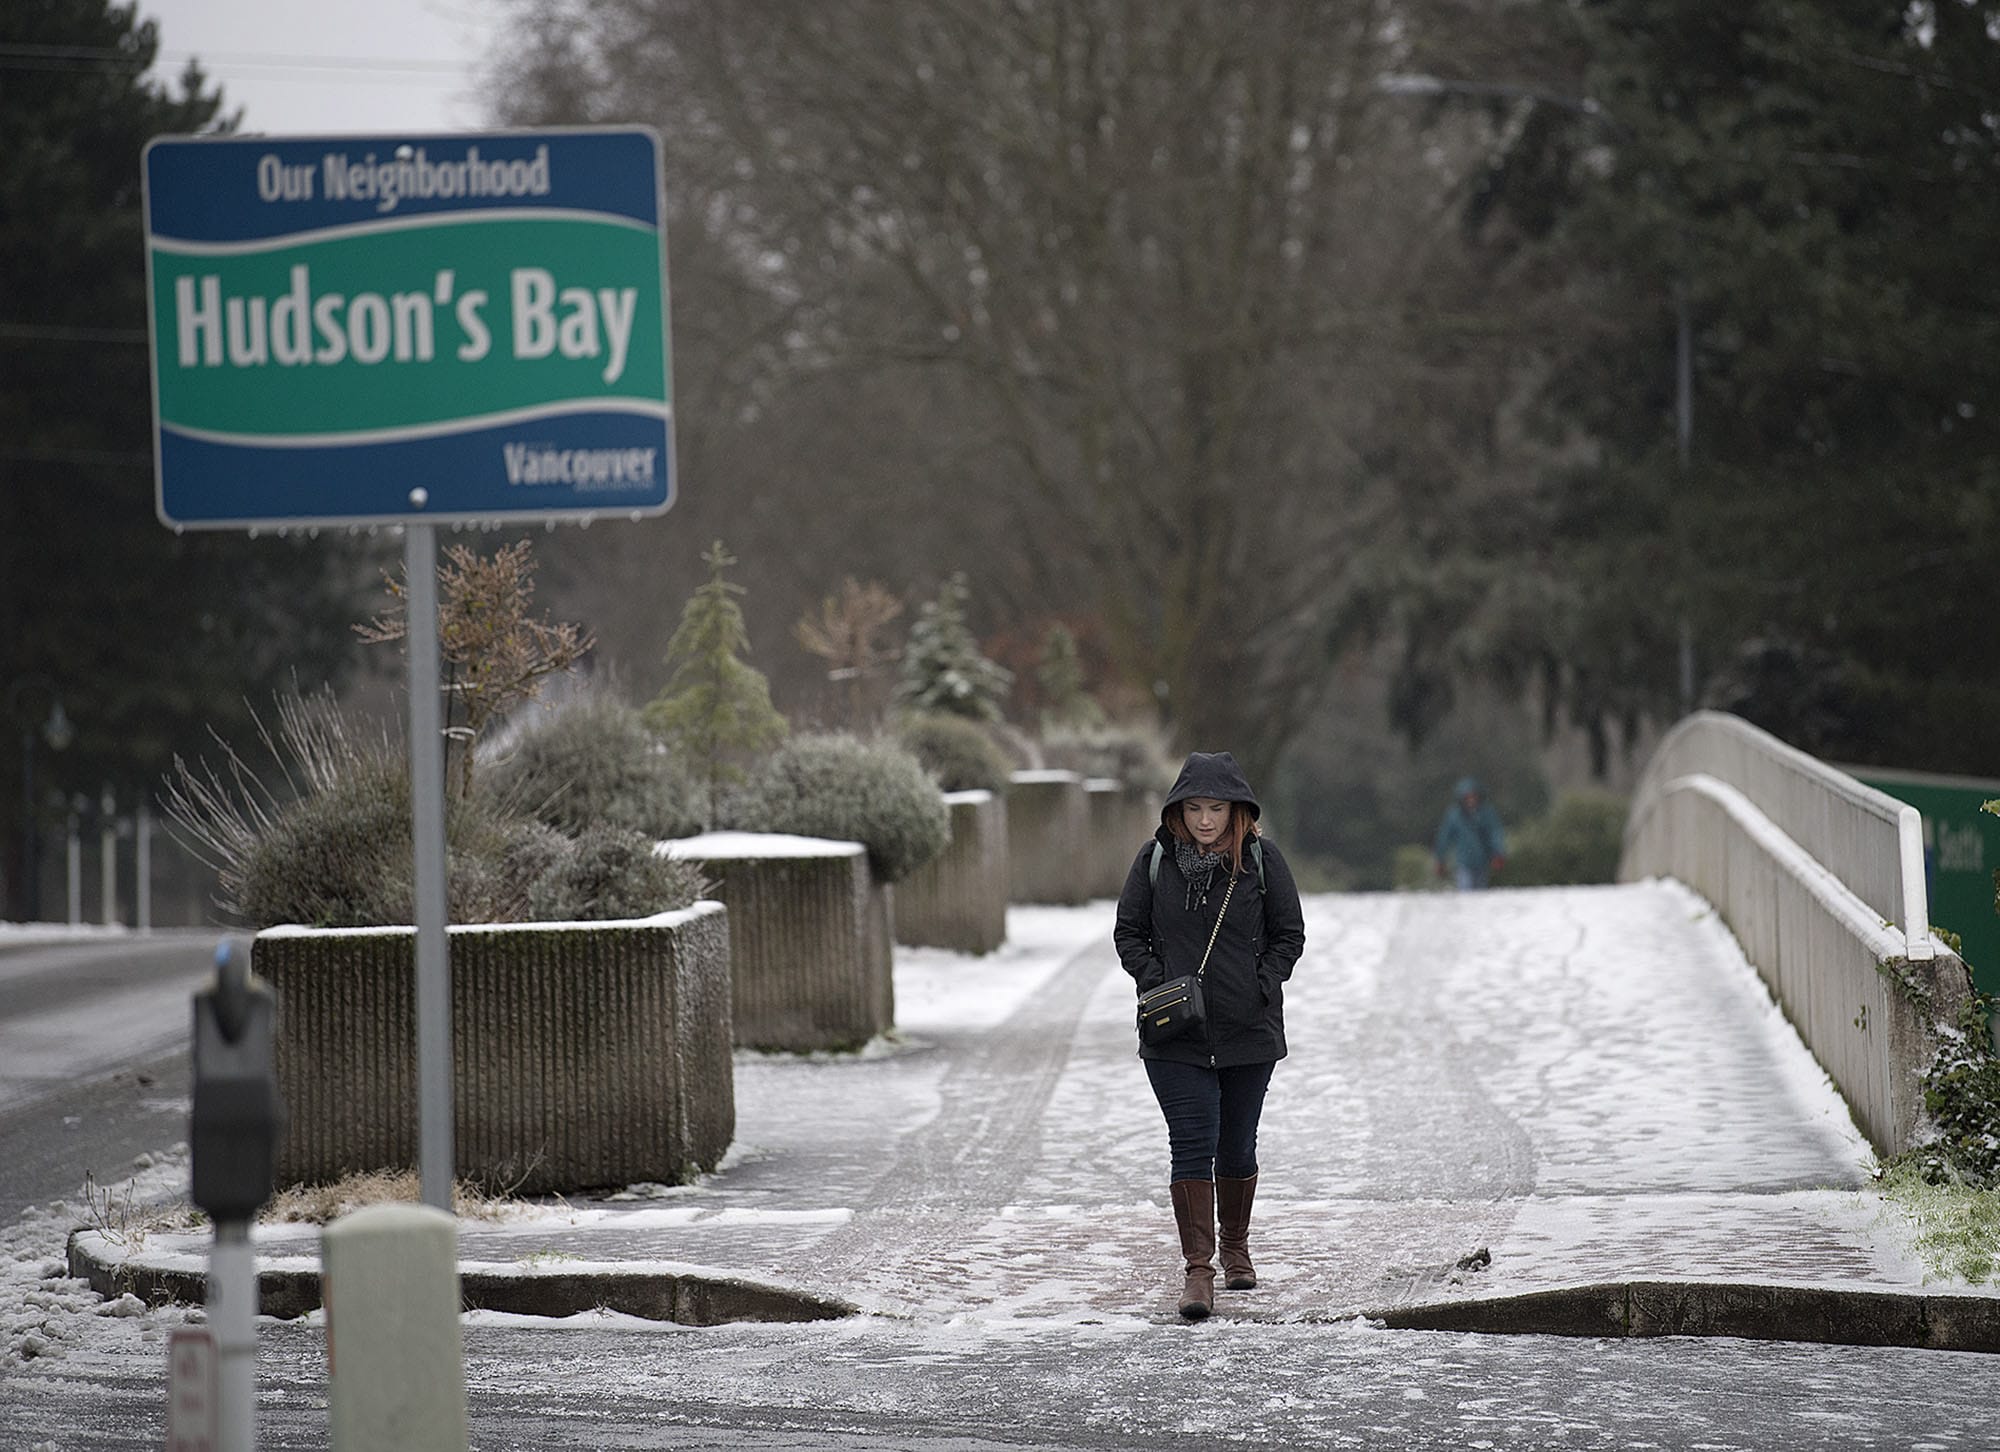 Keelie Wray of Vancouver navigates Evergreen Boulevard, which had areas of both slush and ice, Friday morning.